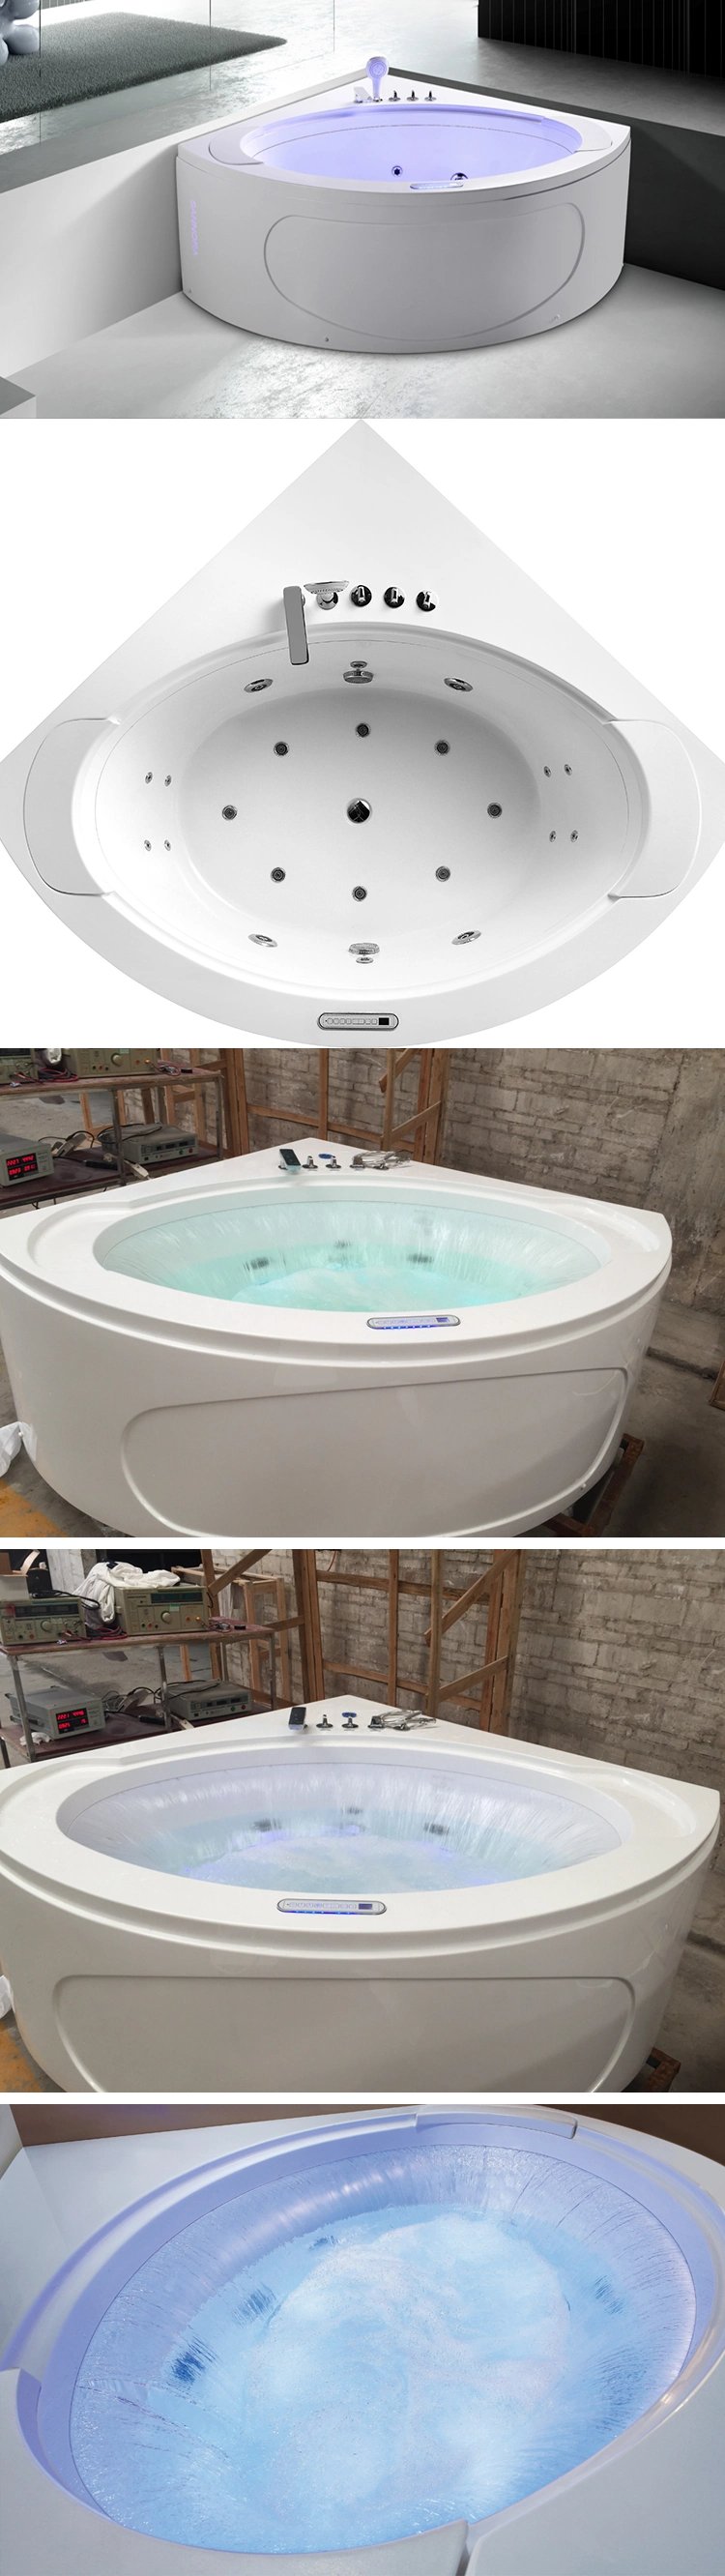 High Quality 2 Person Jetted Corner Hydromassage Tub Bathtubs